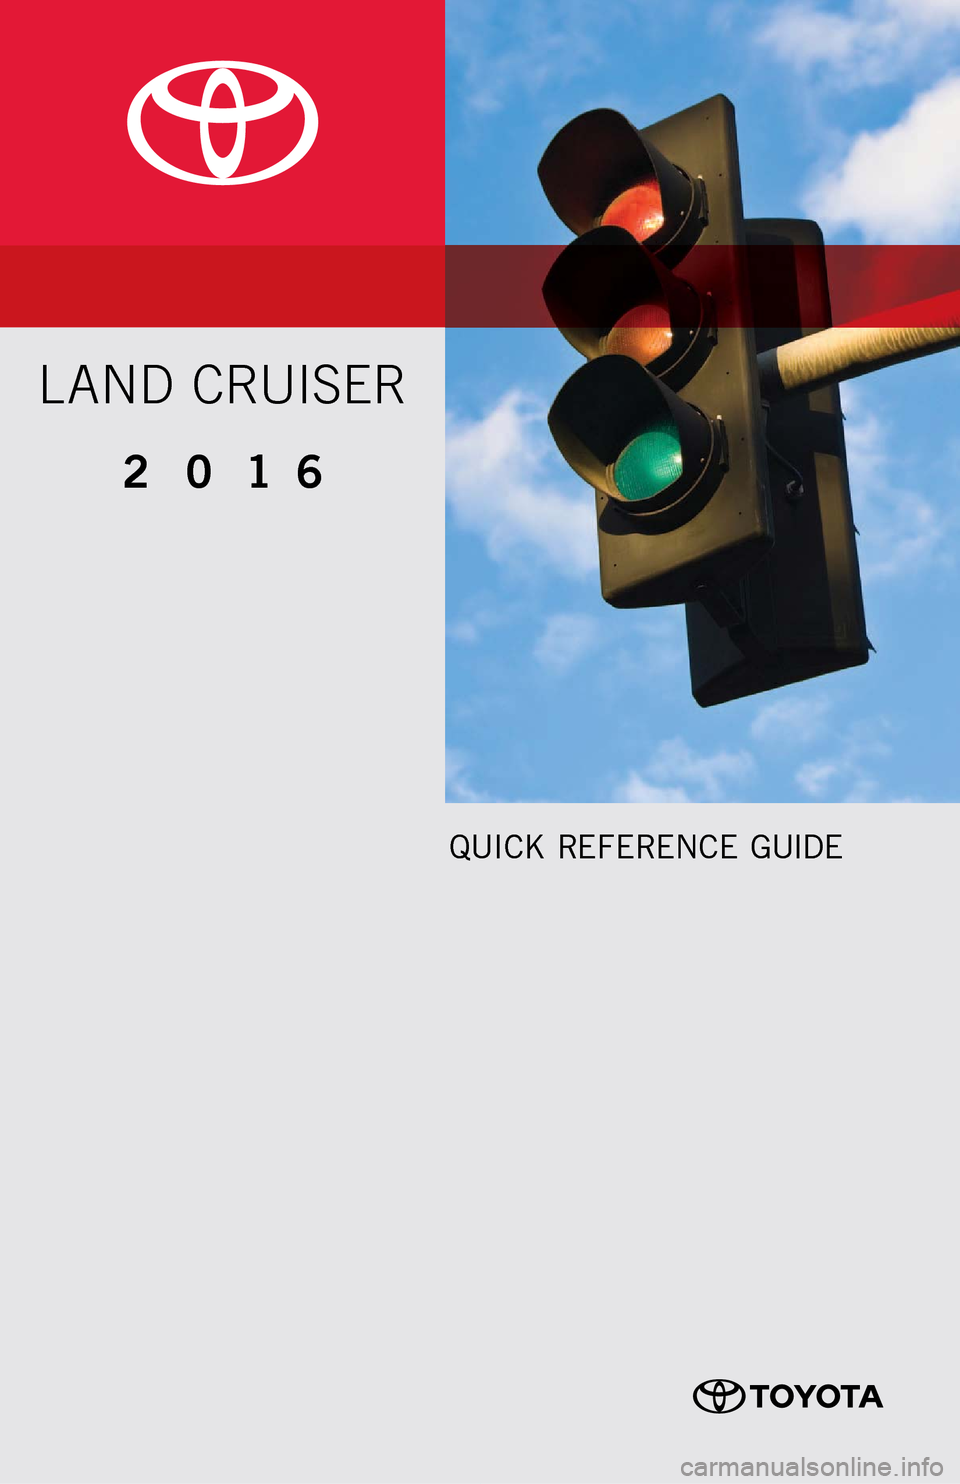 TOYOTA LAND CRUISER 2016 J200 Quick Reference Guide QUICK REFERENCE GUIDE
2016
LAND CRUISER 